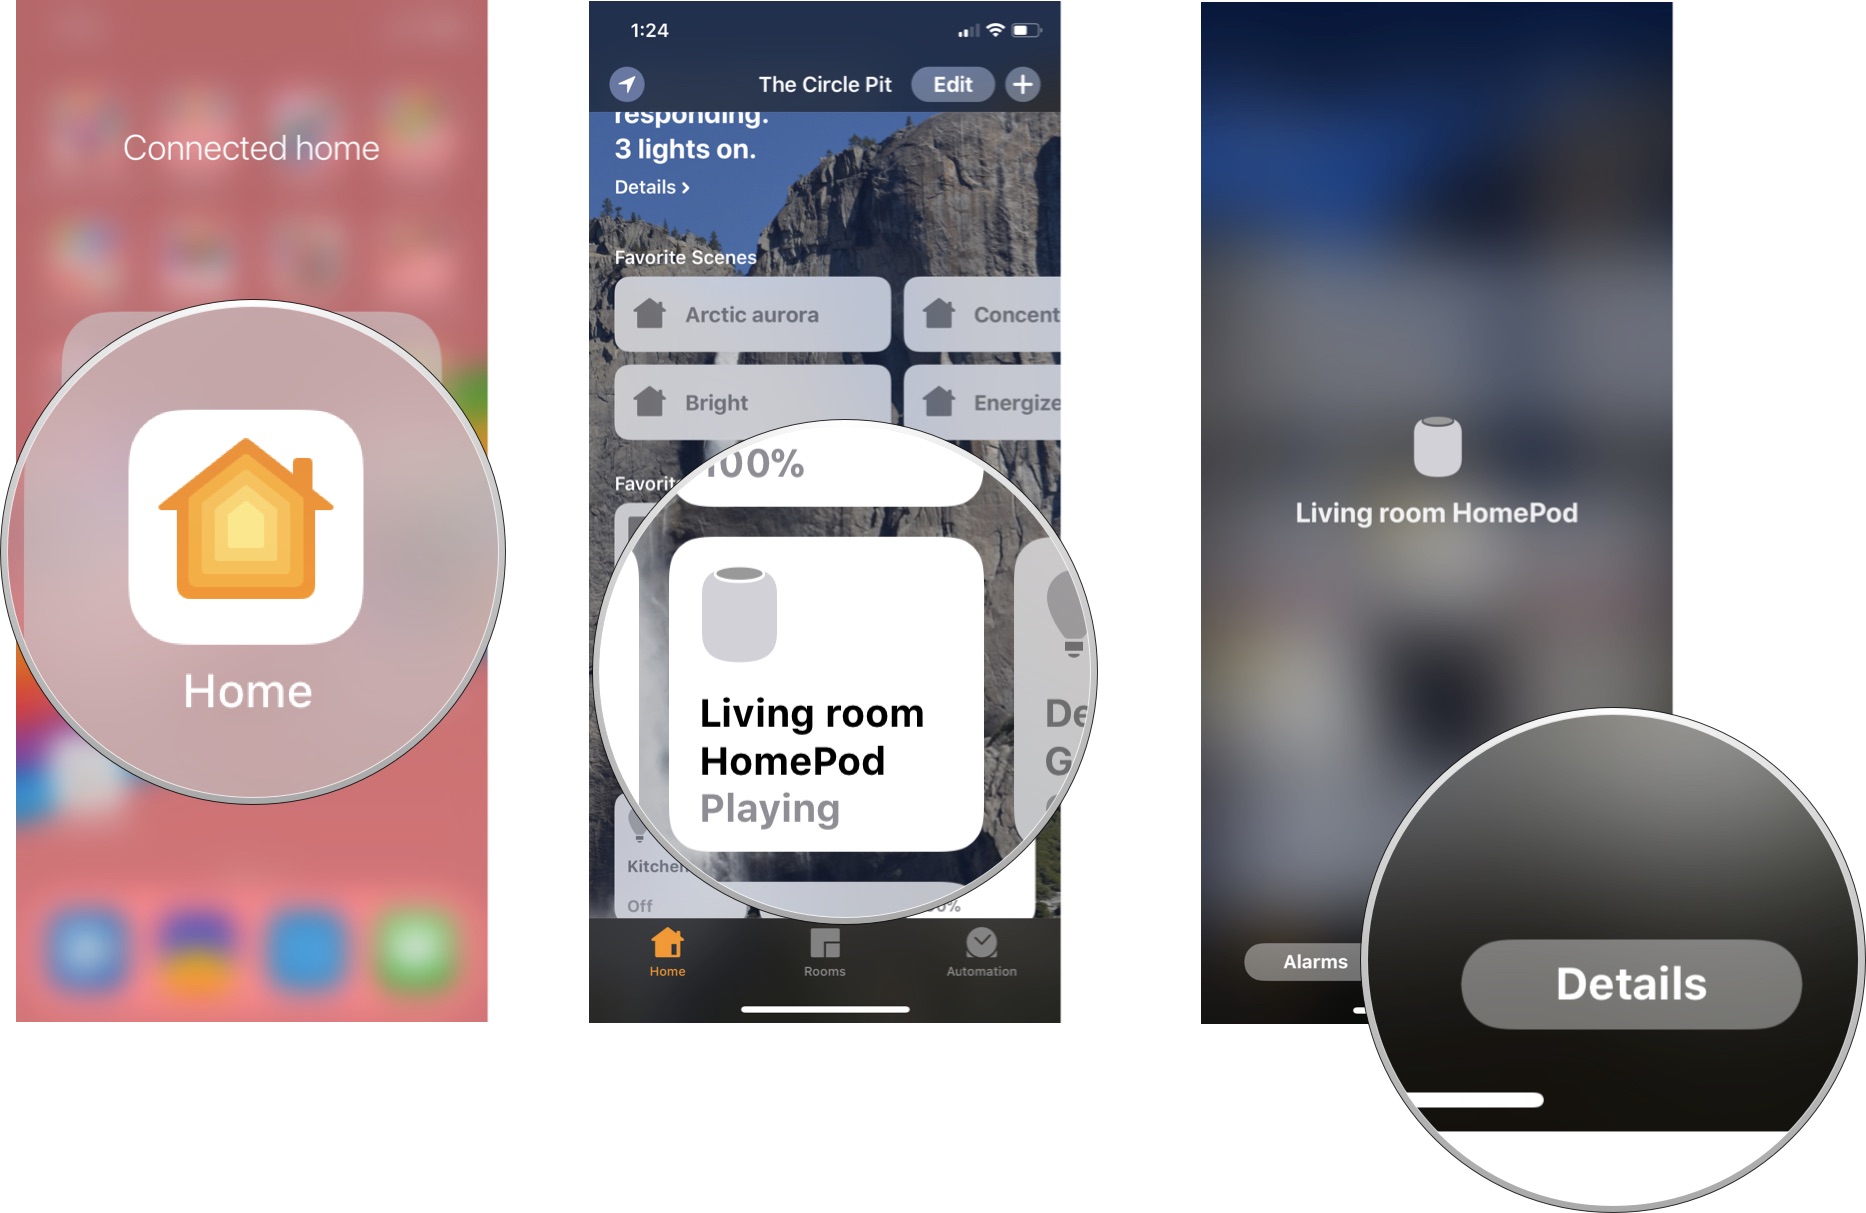 Launch the Home app, then long press on your HomePod, then tap Details